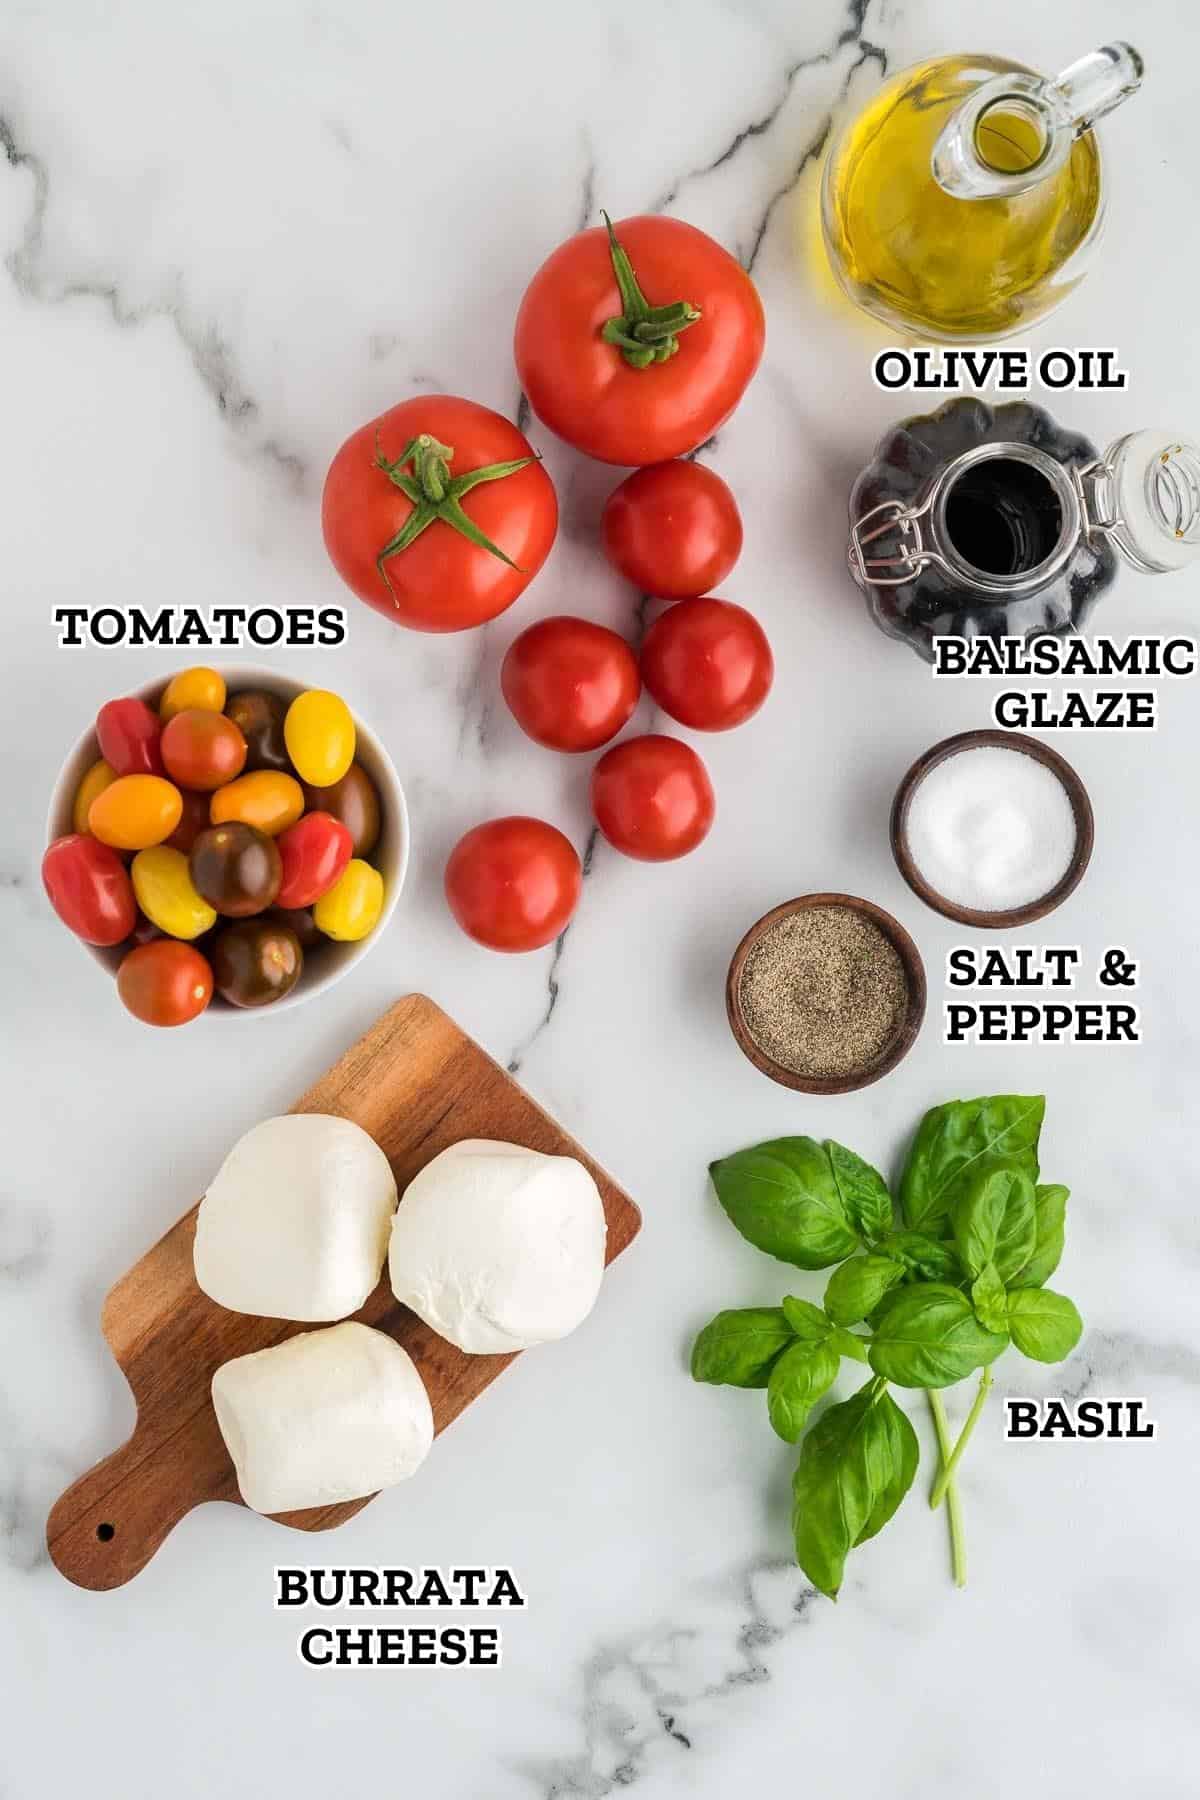 A labeled image of ingredients needed to make burrata caprese salad.